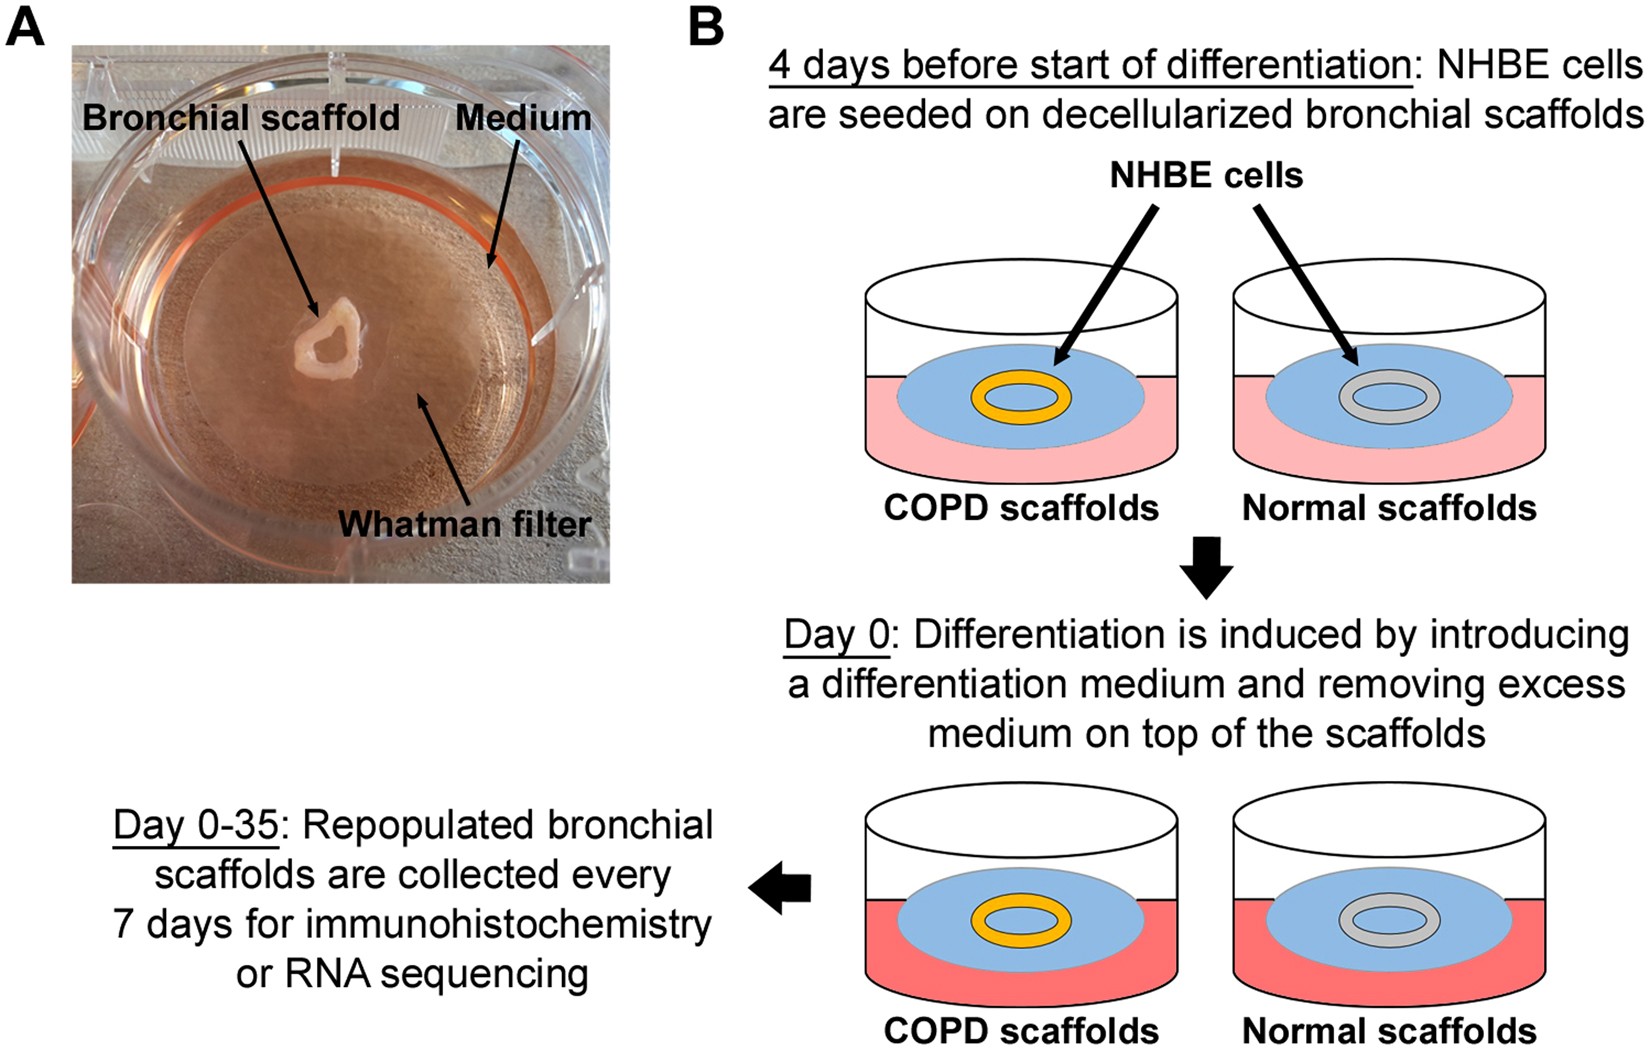 Bronchial extracellular matrix from COPD patients induces altered gene expression in primary human bronchial epithelial cells | Scientific Reports